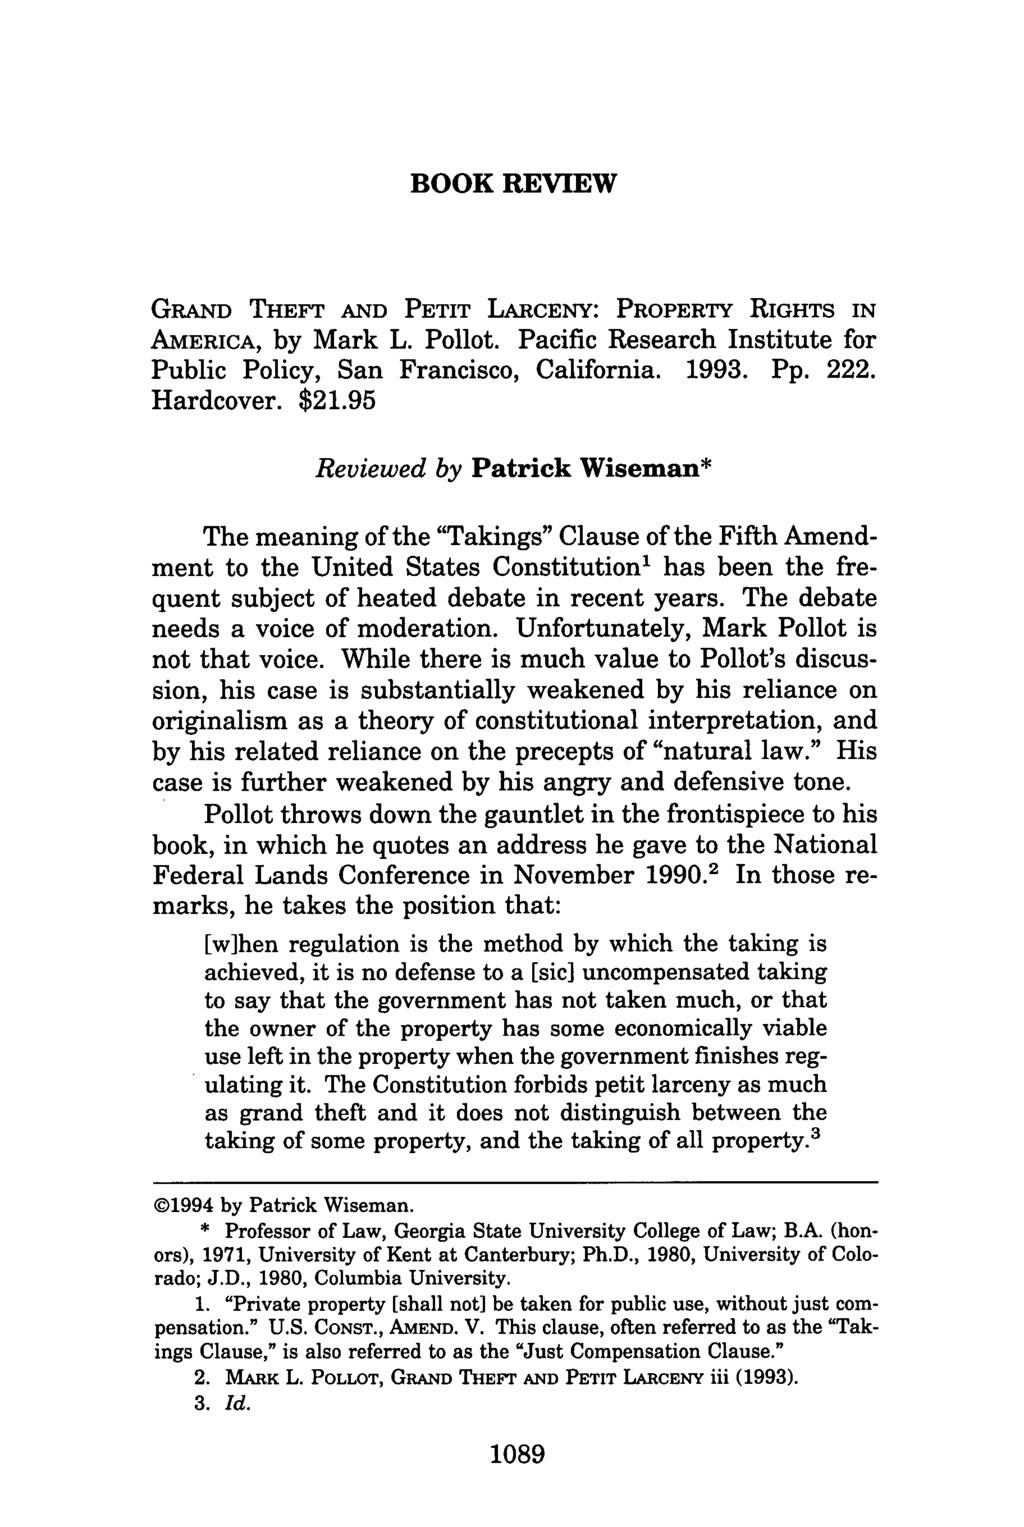 BOOK REVIEW GRAND THEFT AND PETIT LARCENY: PROPERTY RIGHTS IN AMERICA, by Mark L. Pollot. Pacific Research Institute for Public Policy, San Francisco, California. 1993. Pp. 222. Hardcover. $21.